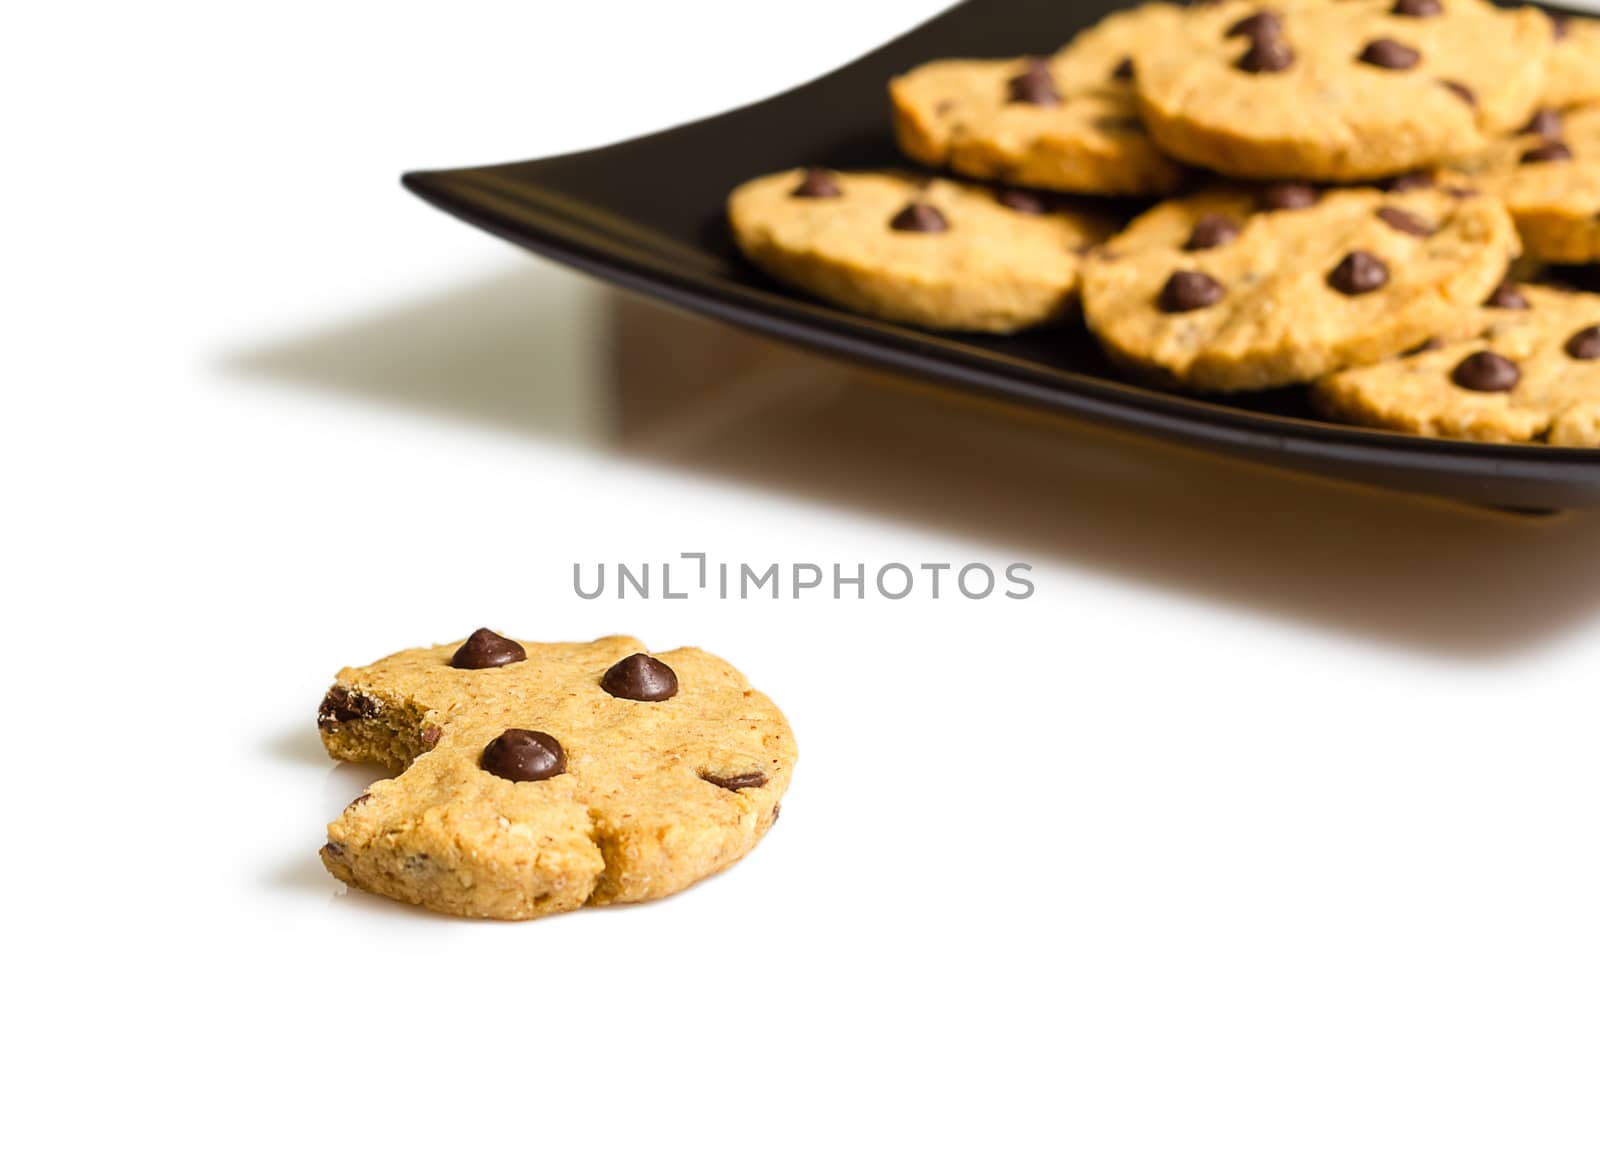 Closeup of chocolate chip cookie with a bite and pile of cookies in a square black plate on white background